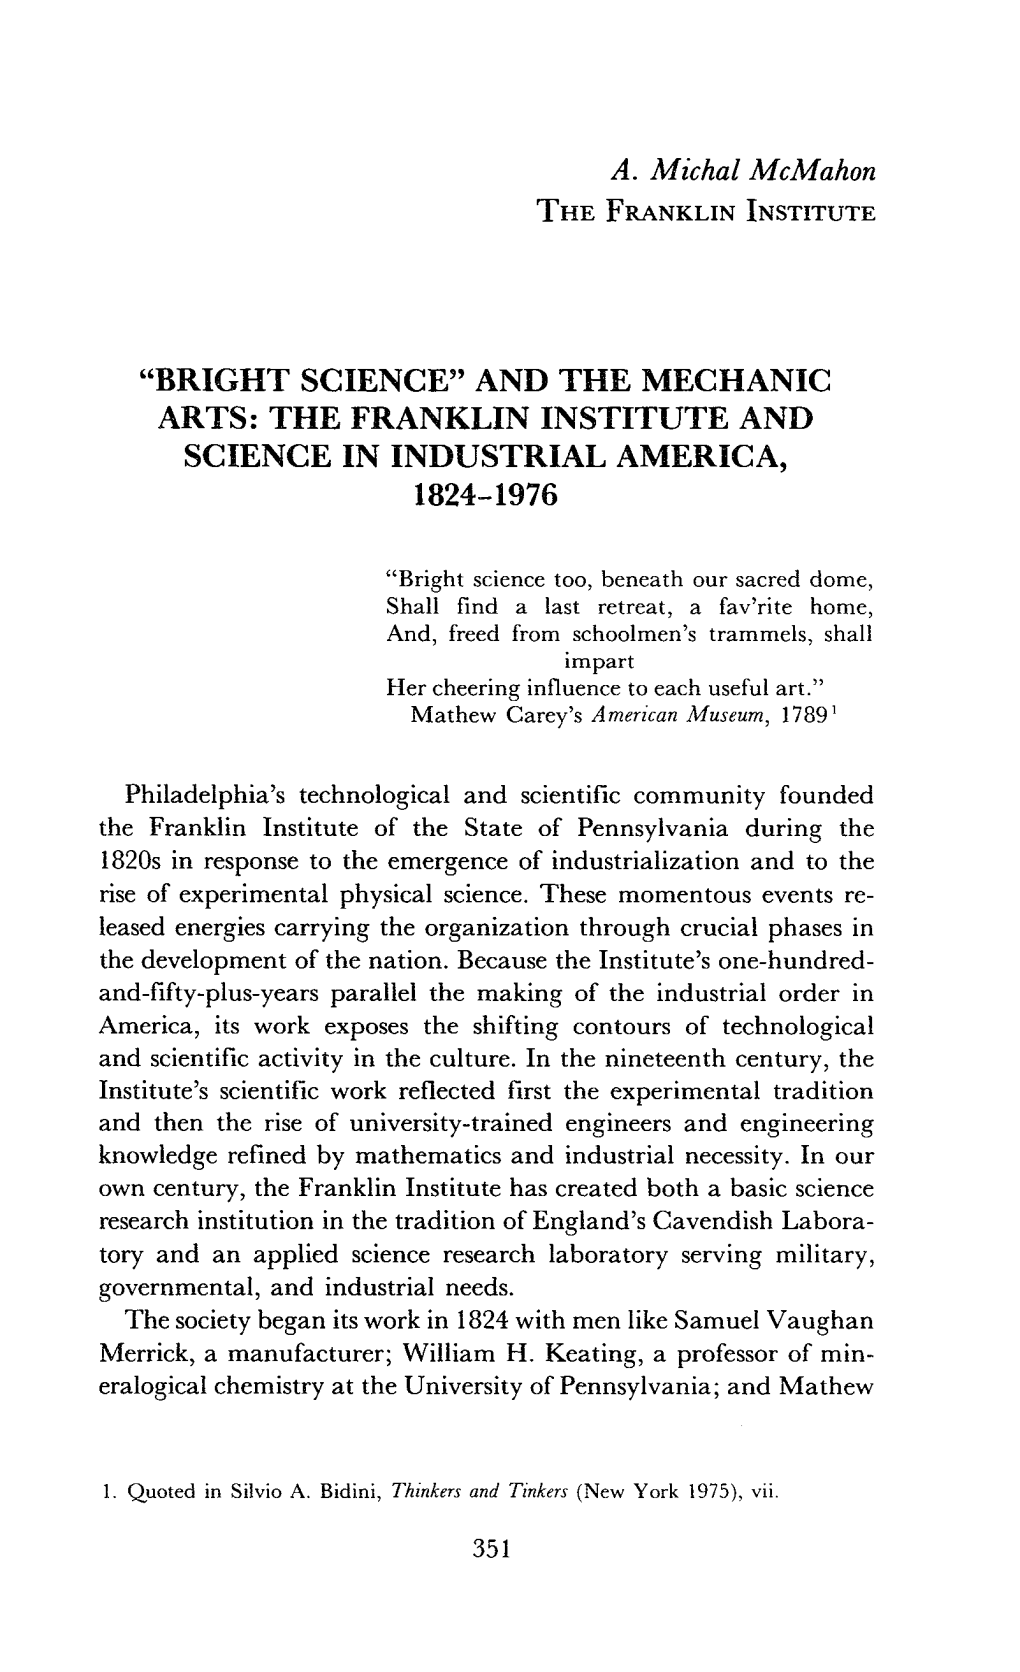 And the Mechanic Arts: the Franklin Institute and Science in Industrial America, 1824-1976